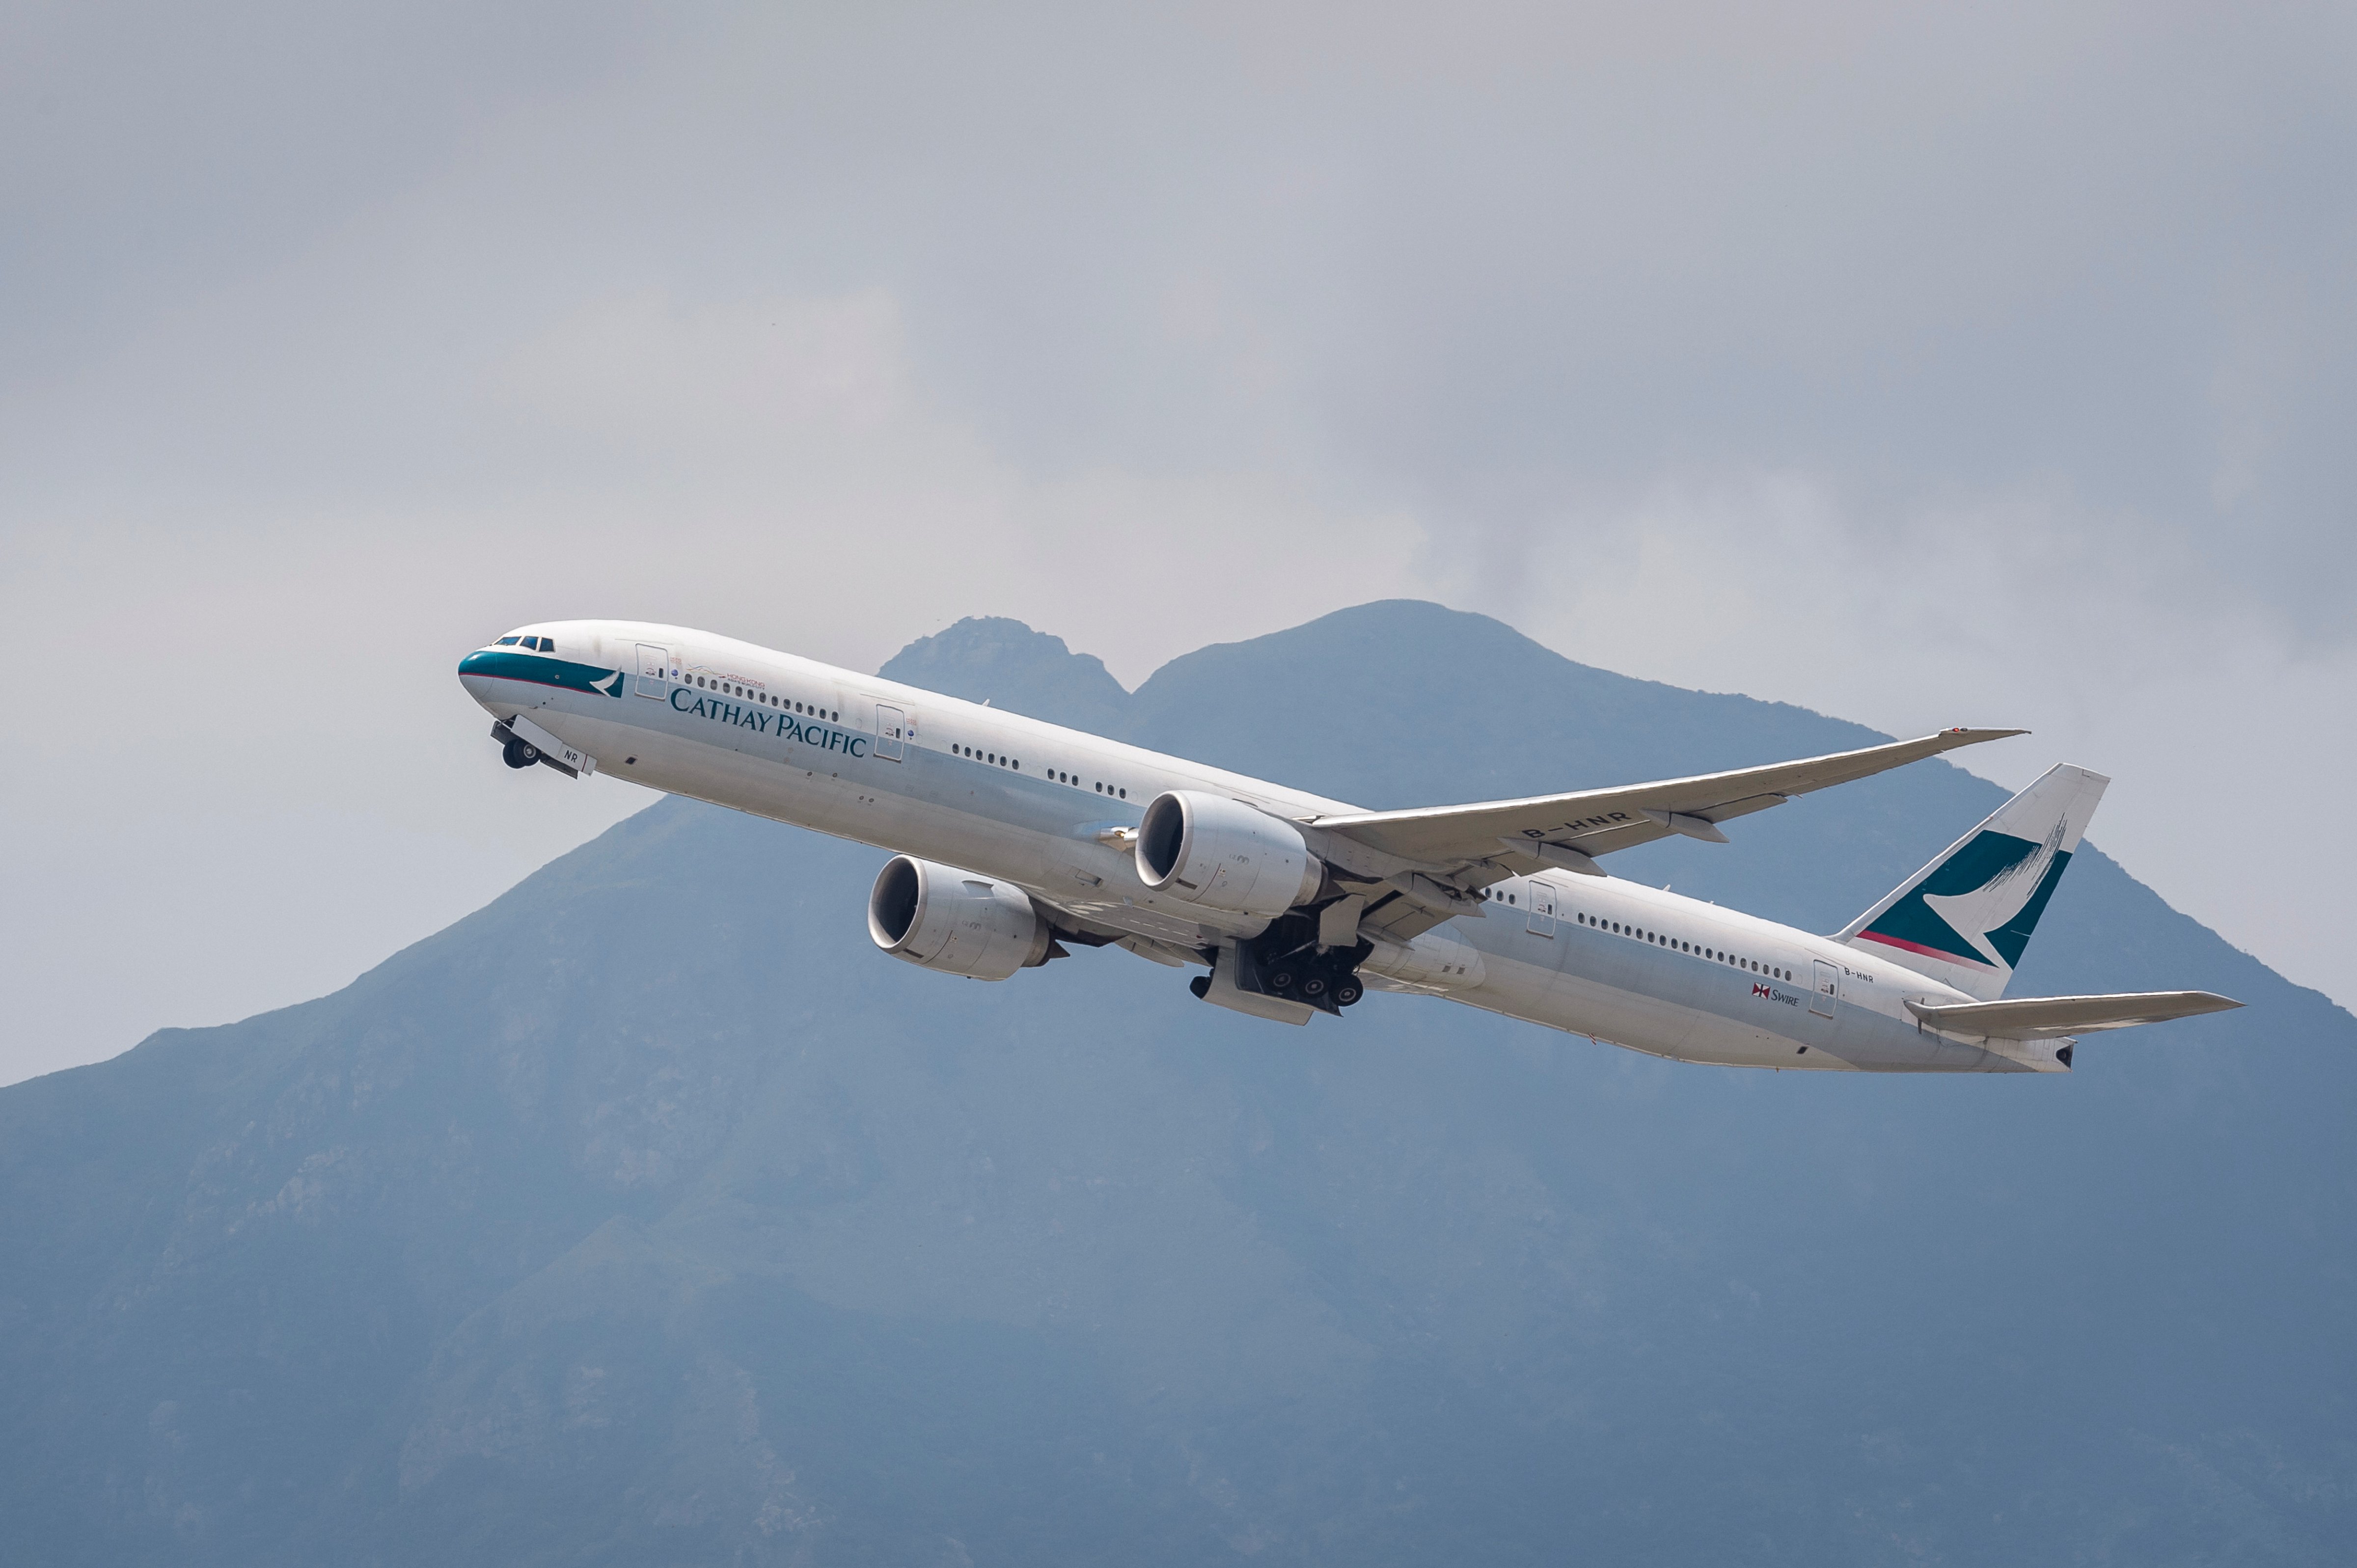 A Boeing 777-367(ER) passenger plane belonging to Cathay Pacific takes off from the Hong Kong International Airport in Hong Kong on Aug. 08 2018. (Marcio Rodrigo Machado—S3studio/Getty Images)